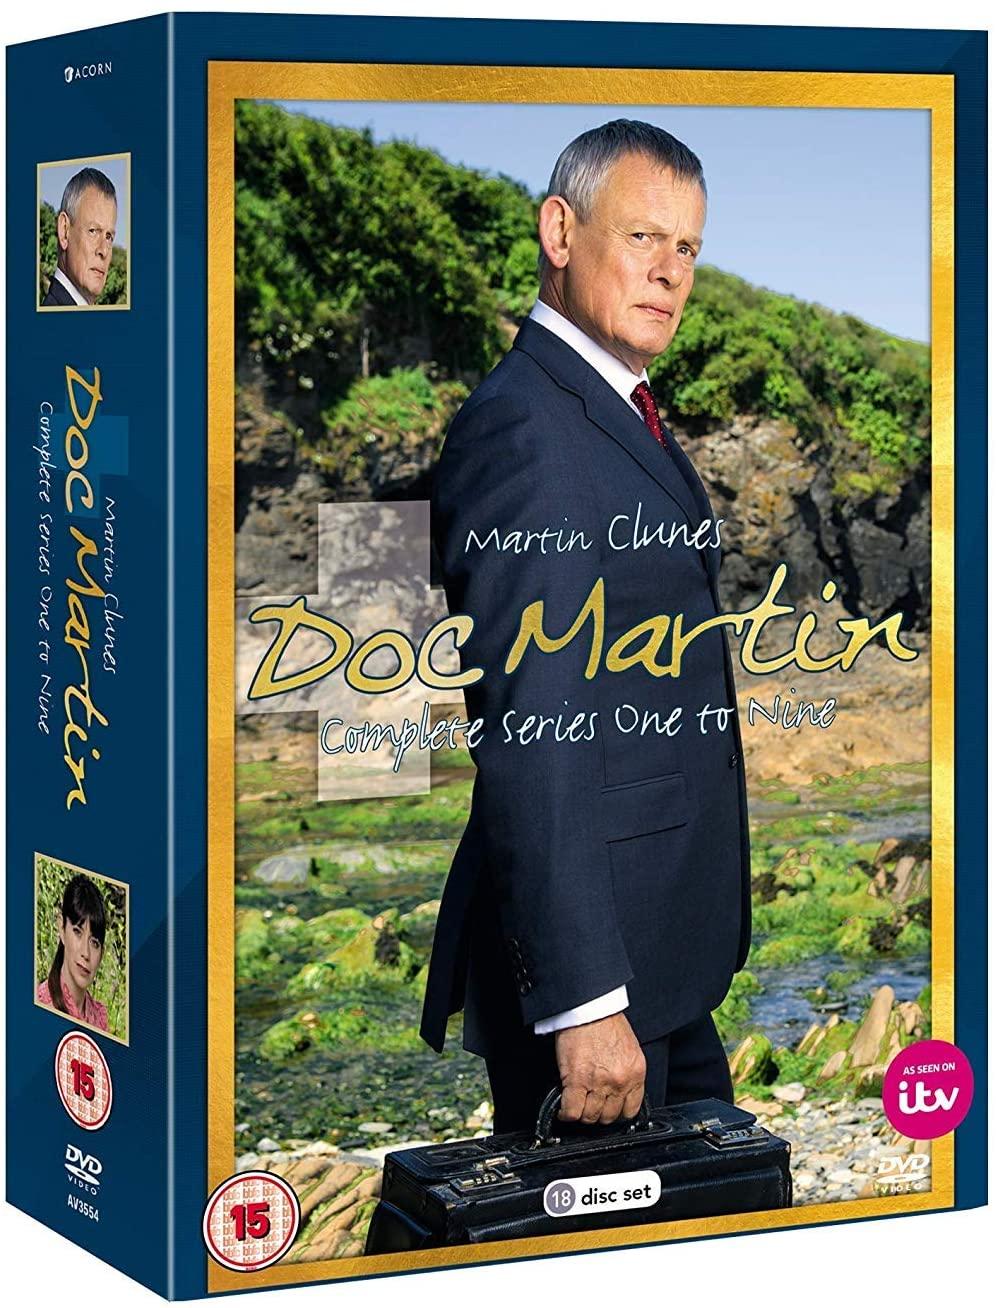 DOC MARTIN: COMPLETE SERIES ONE TO NINE 18DVD